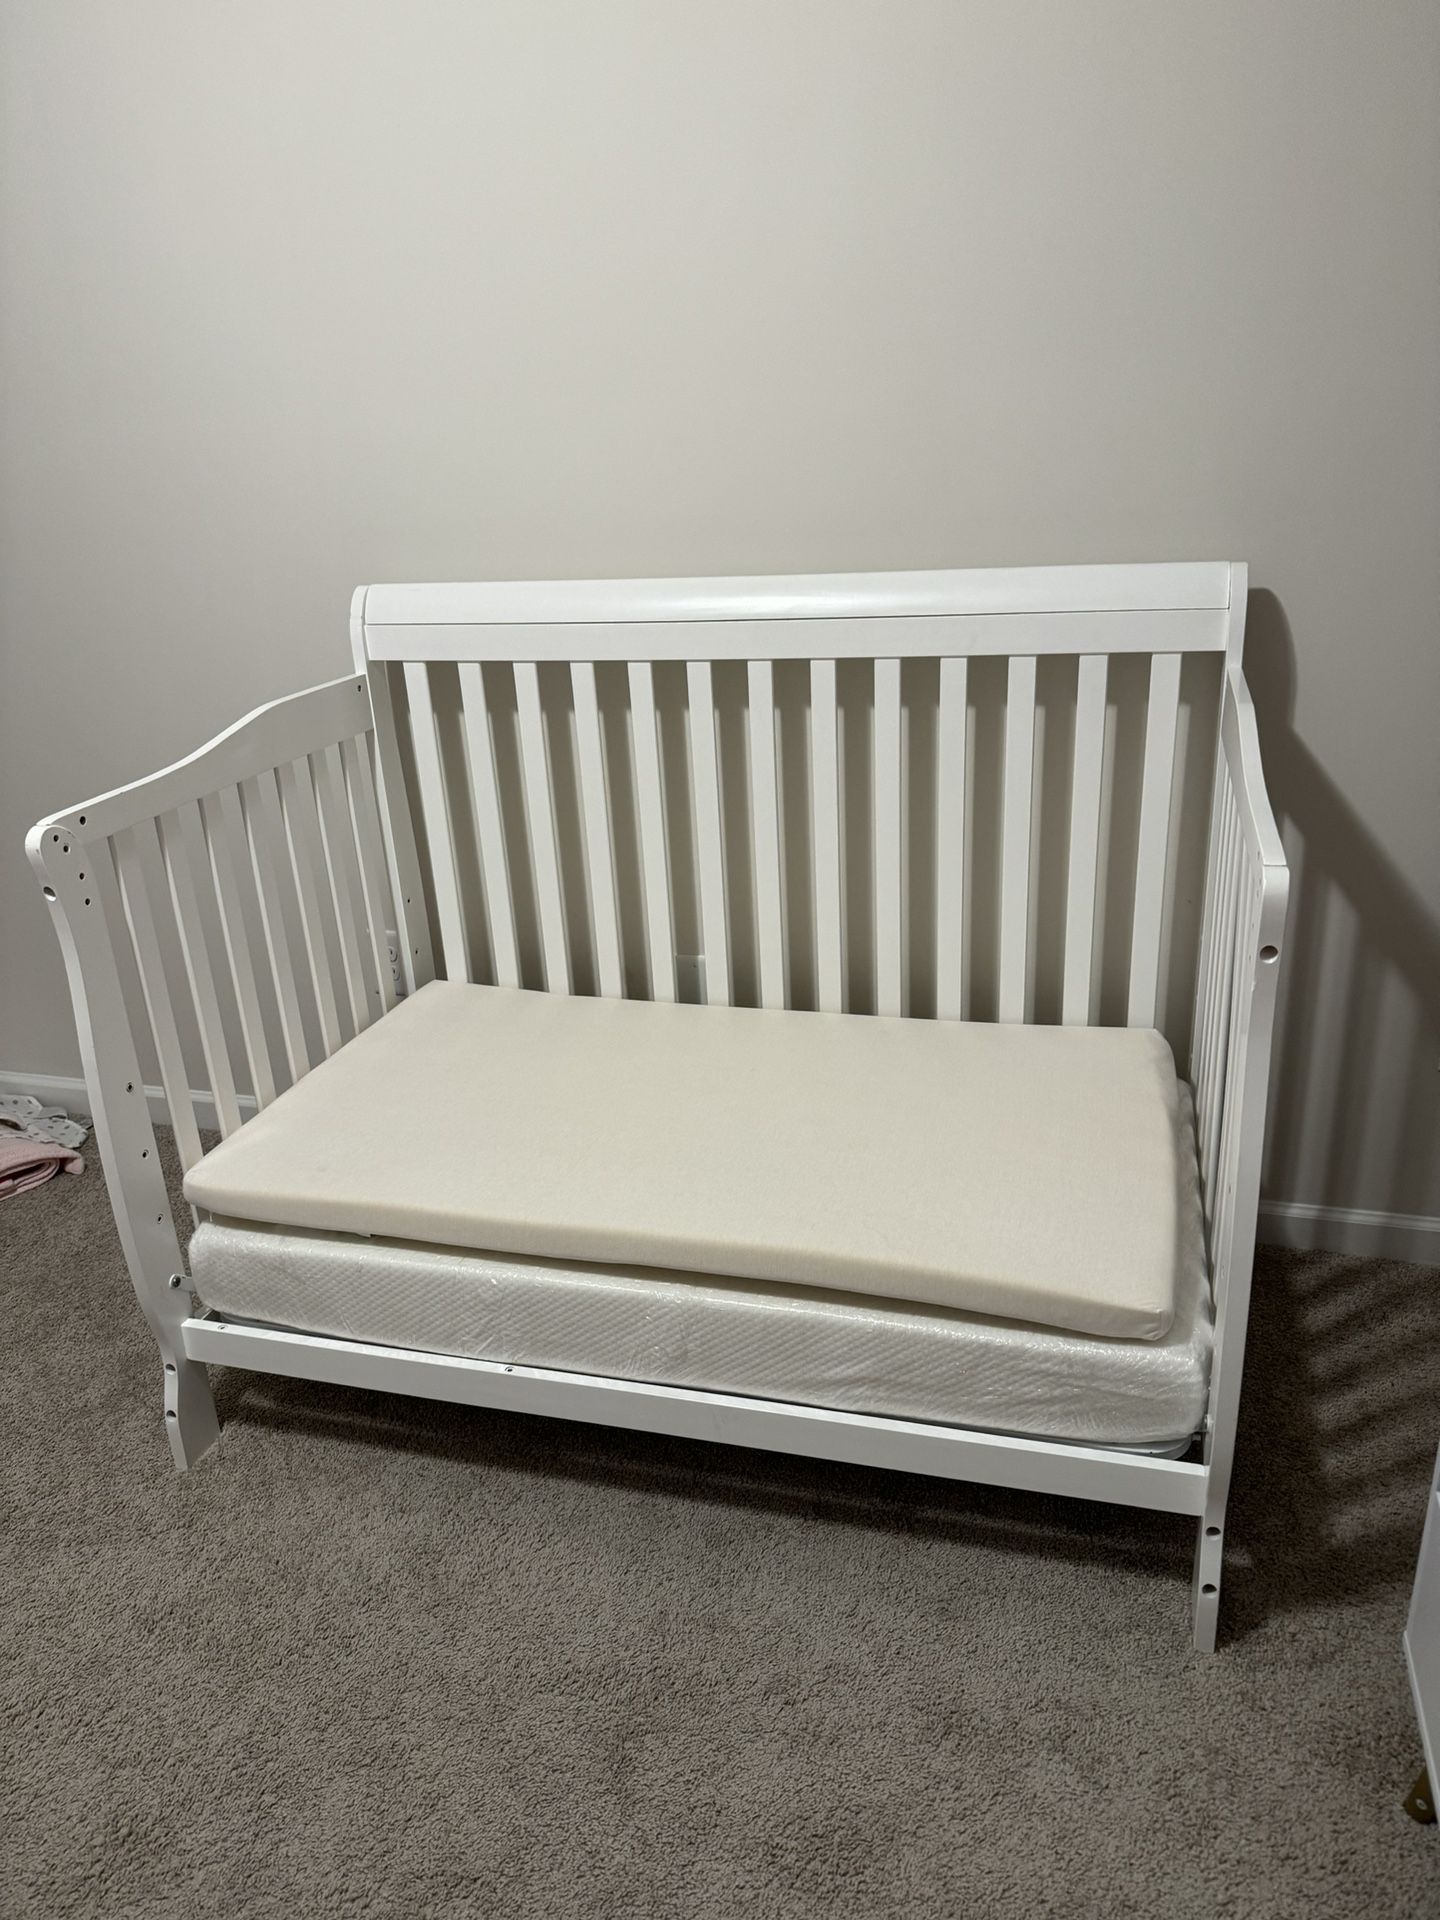 Baby To Toddler Crib With Mattress And Memory Foam Mattress Topper